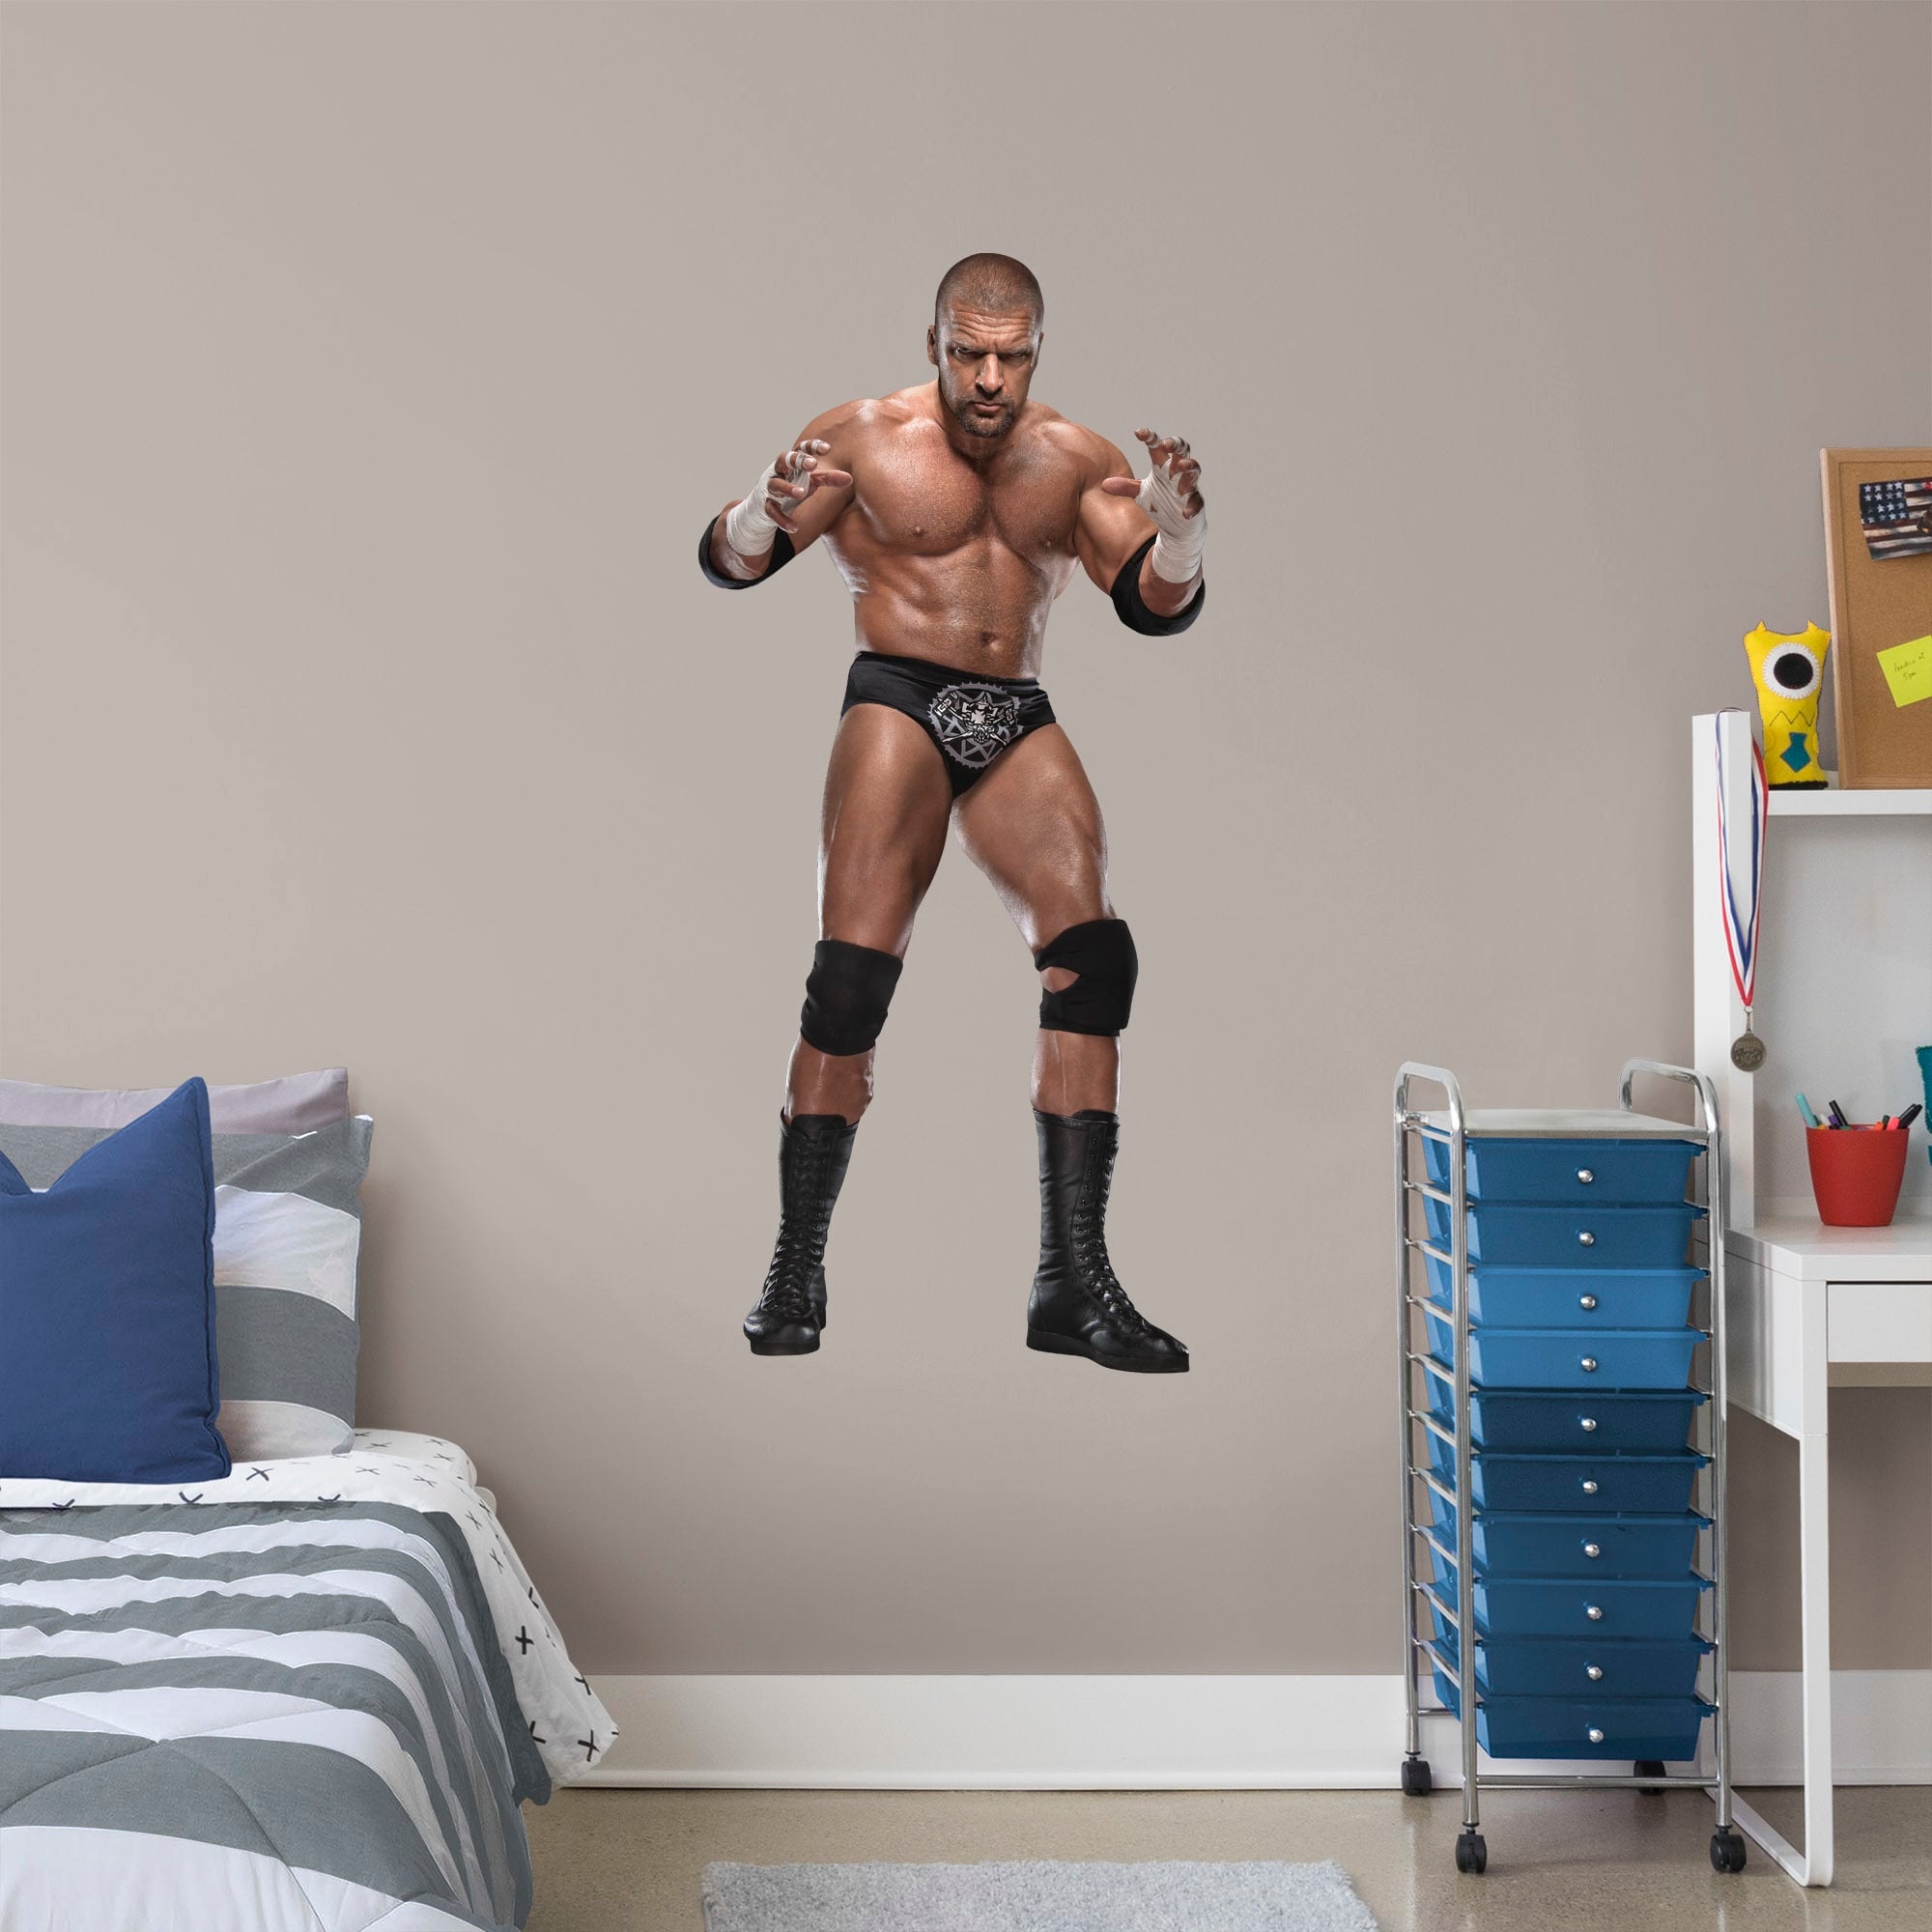 Triple H for WWE - Officially Licensed Removable Wall Decal Giant Superstar + 2 Decals (23"W x 51"H) by Fathead | Vinyl